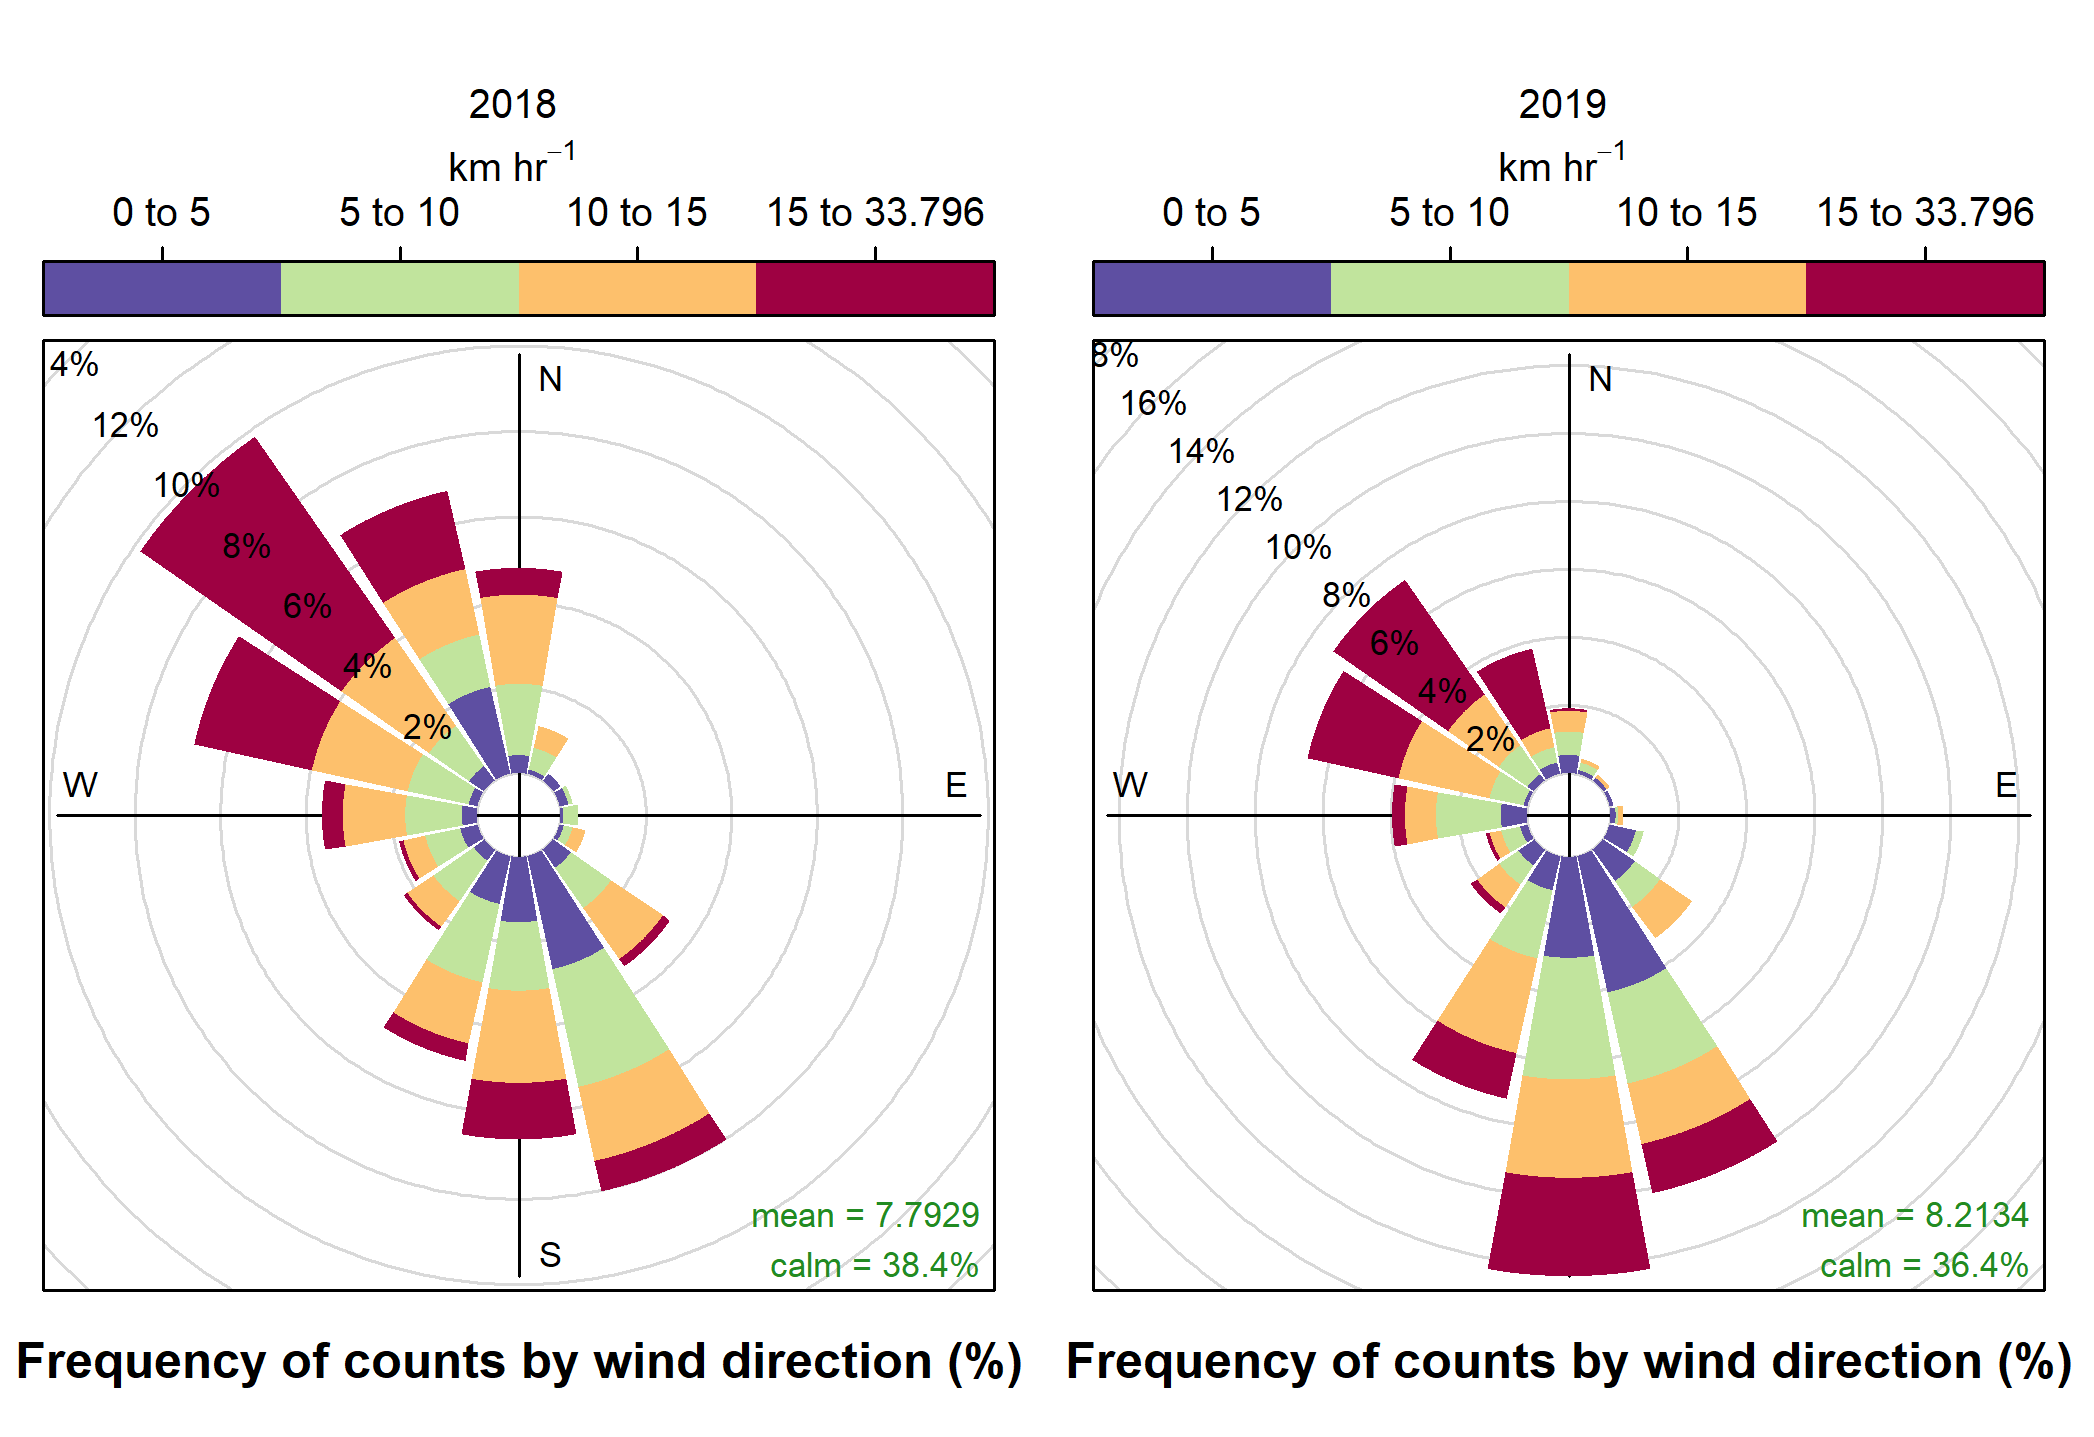 figures showing the prominent wind direction in Grand Rapids over two years